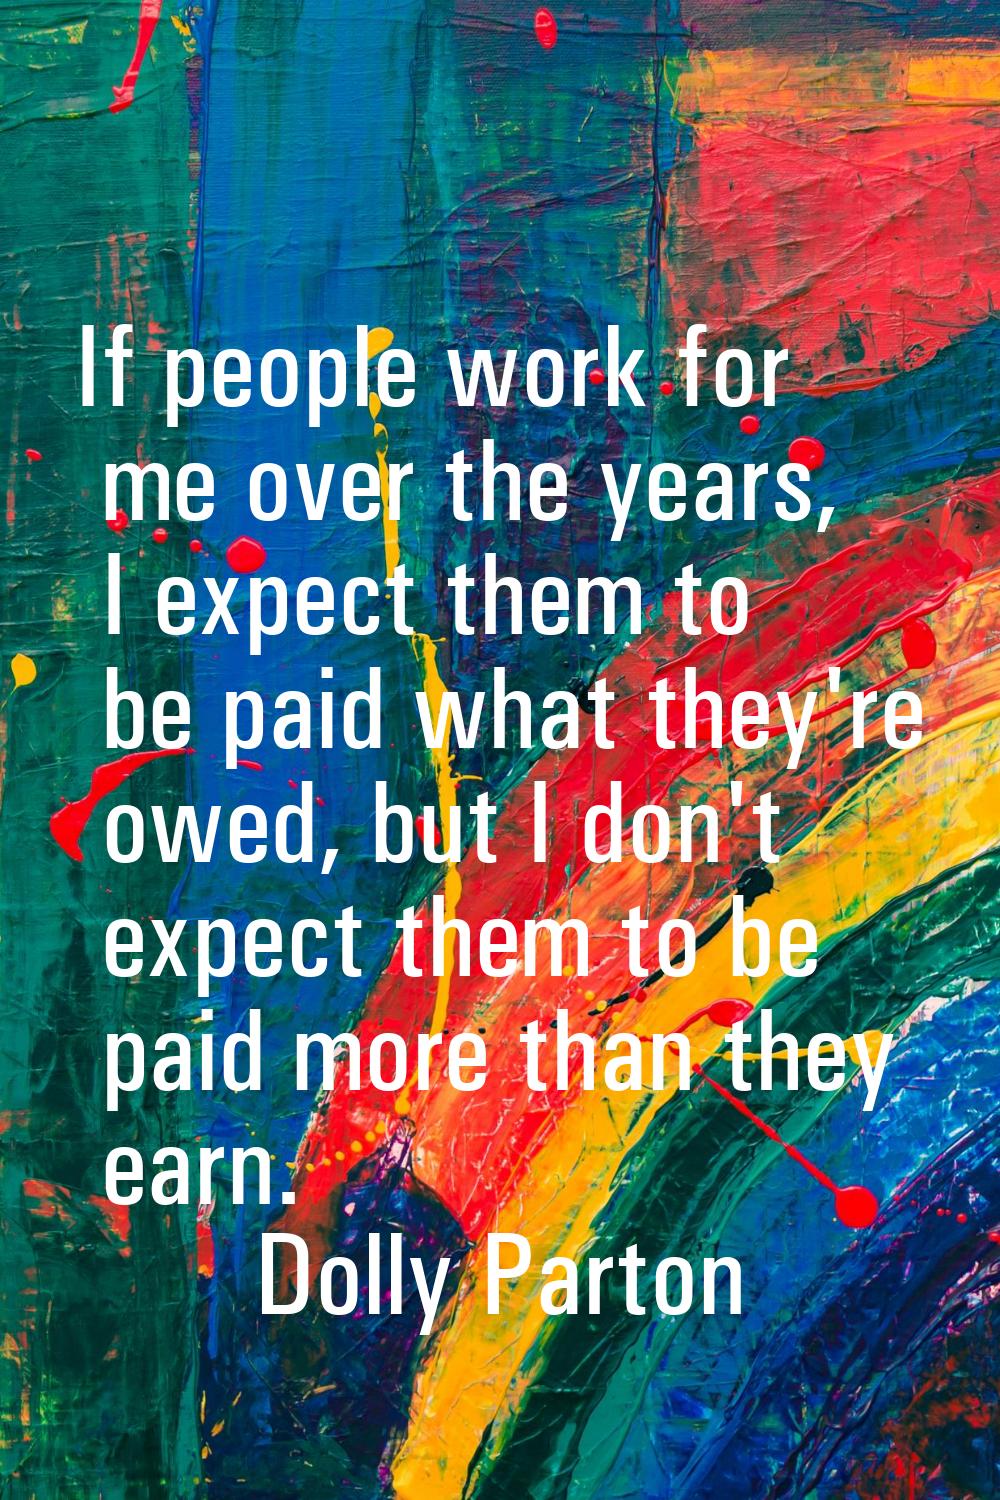 If people work for me over the years, I expect them to be paid what they're owed, but I don't expec